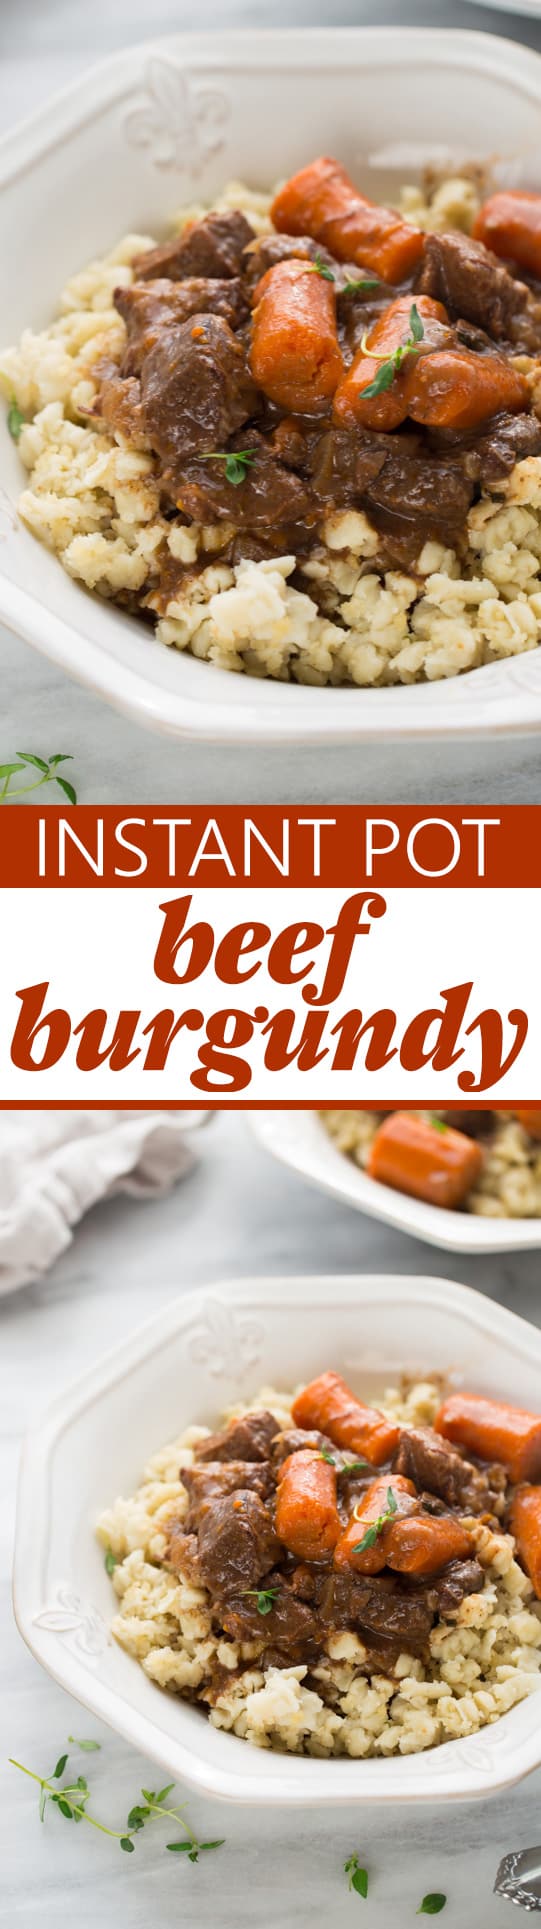 Instant Pot Beef Burgundy! A comforting beef stew cooked until it's fall-apart tender in a flavorful red wine sauce.